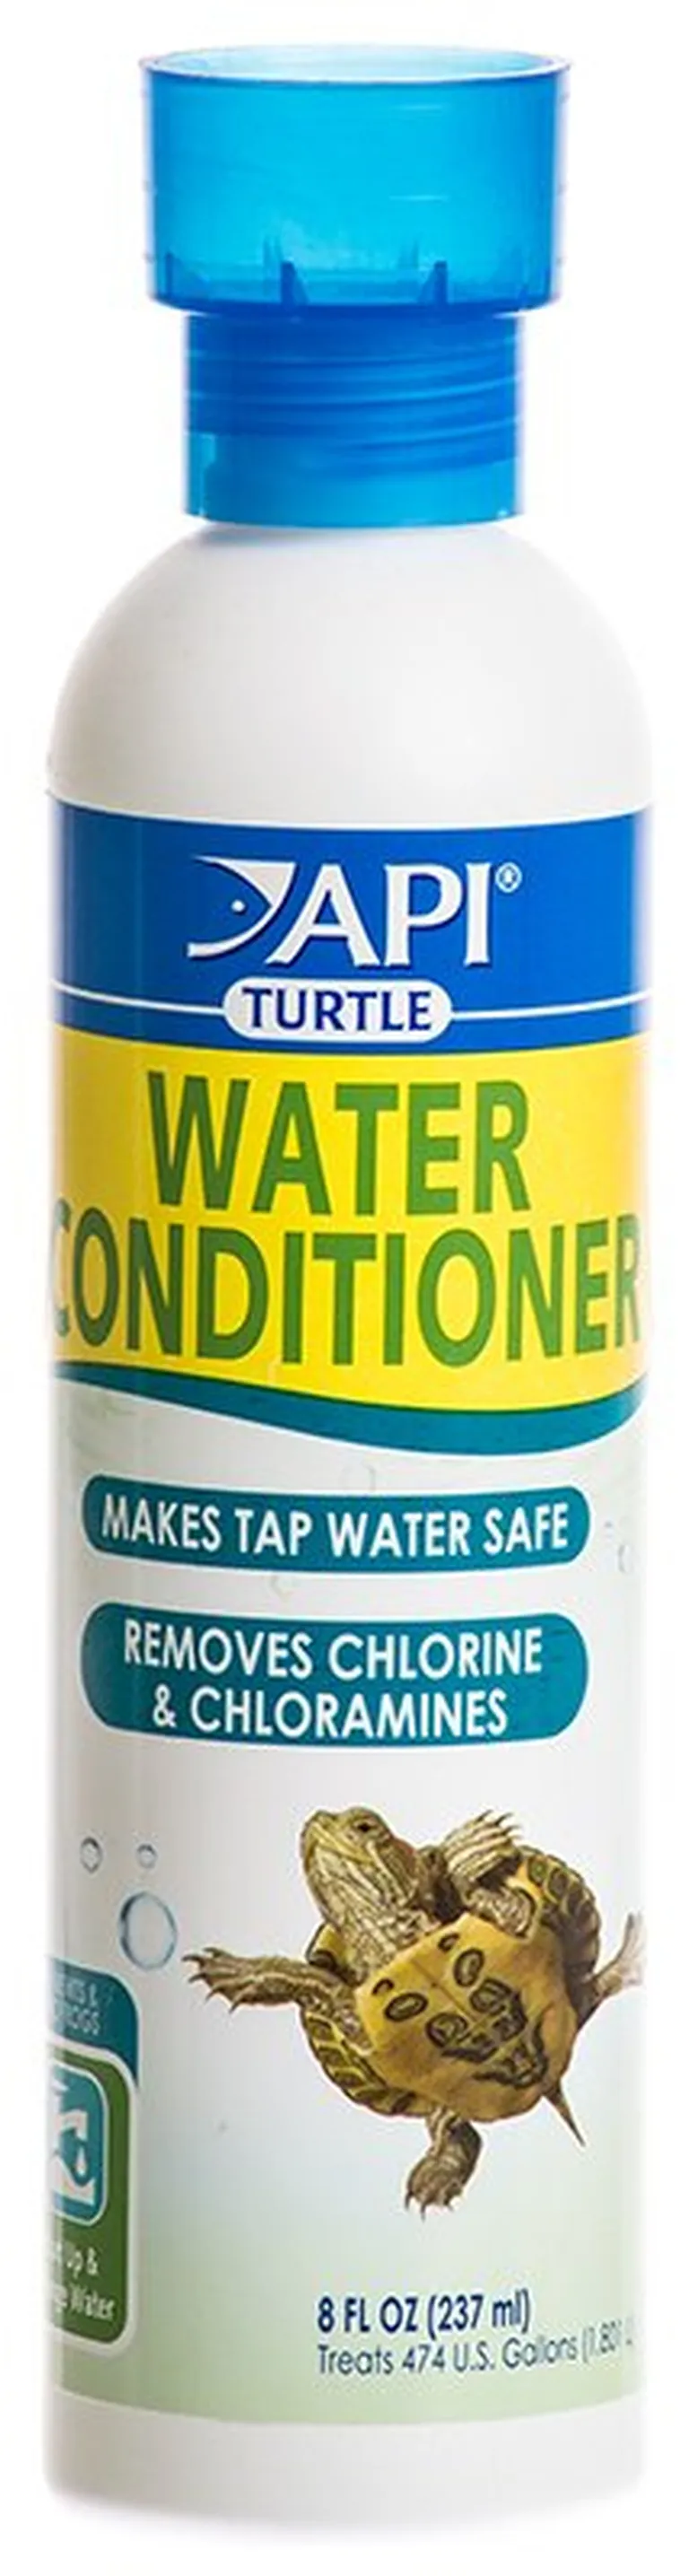 API Turtle Water Conditioner Makes Tap Water Safe Photo 1